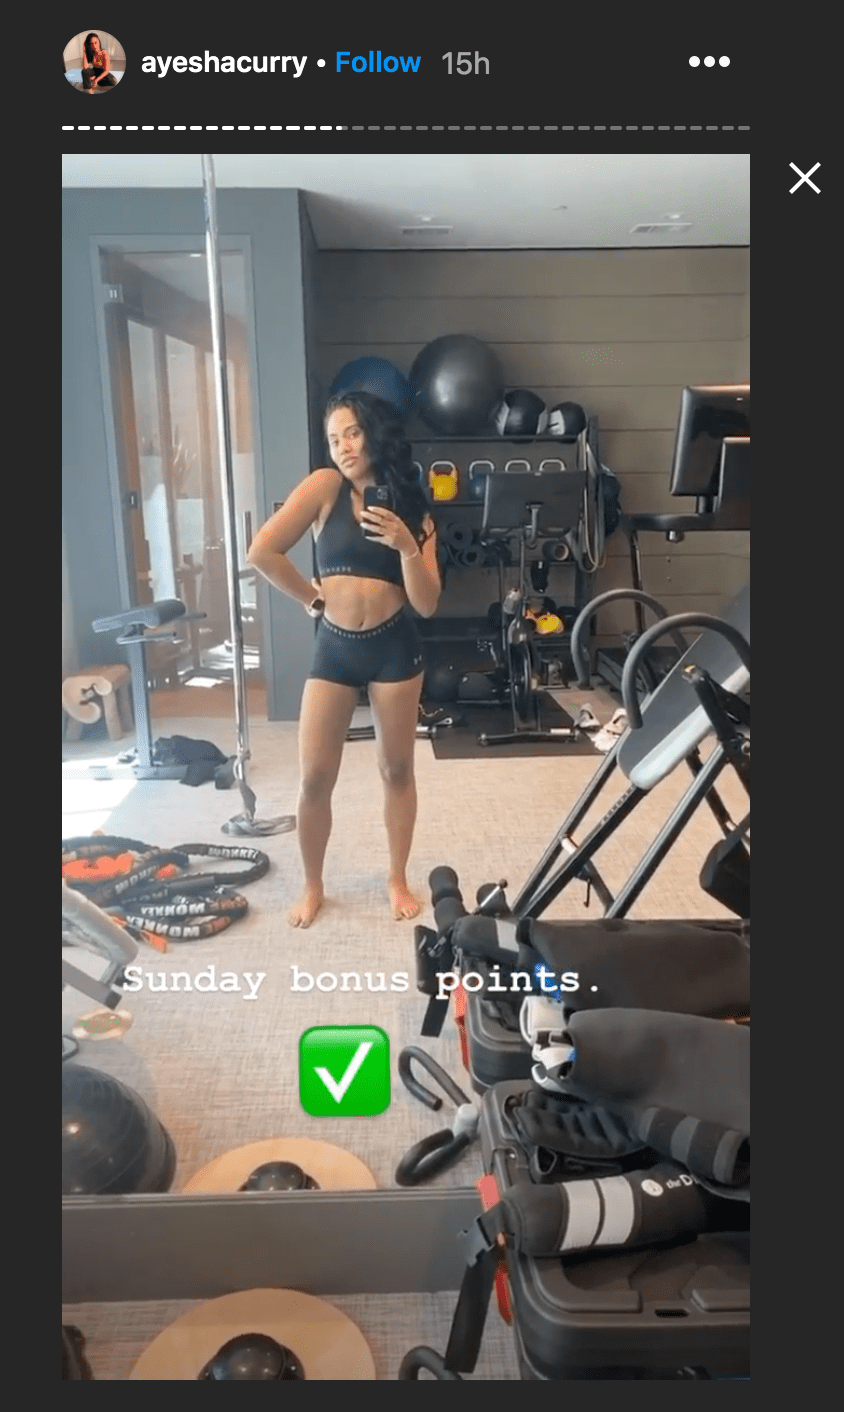 Ayesha Curry poses in her activewear while taking a mirror in her home gym | Source: Instagram.com/ayeshacurry